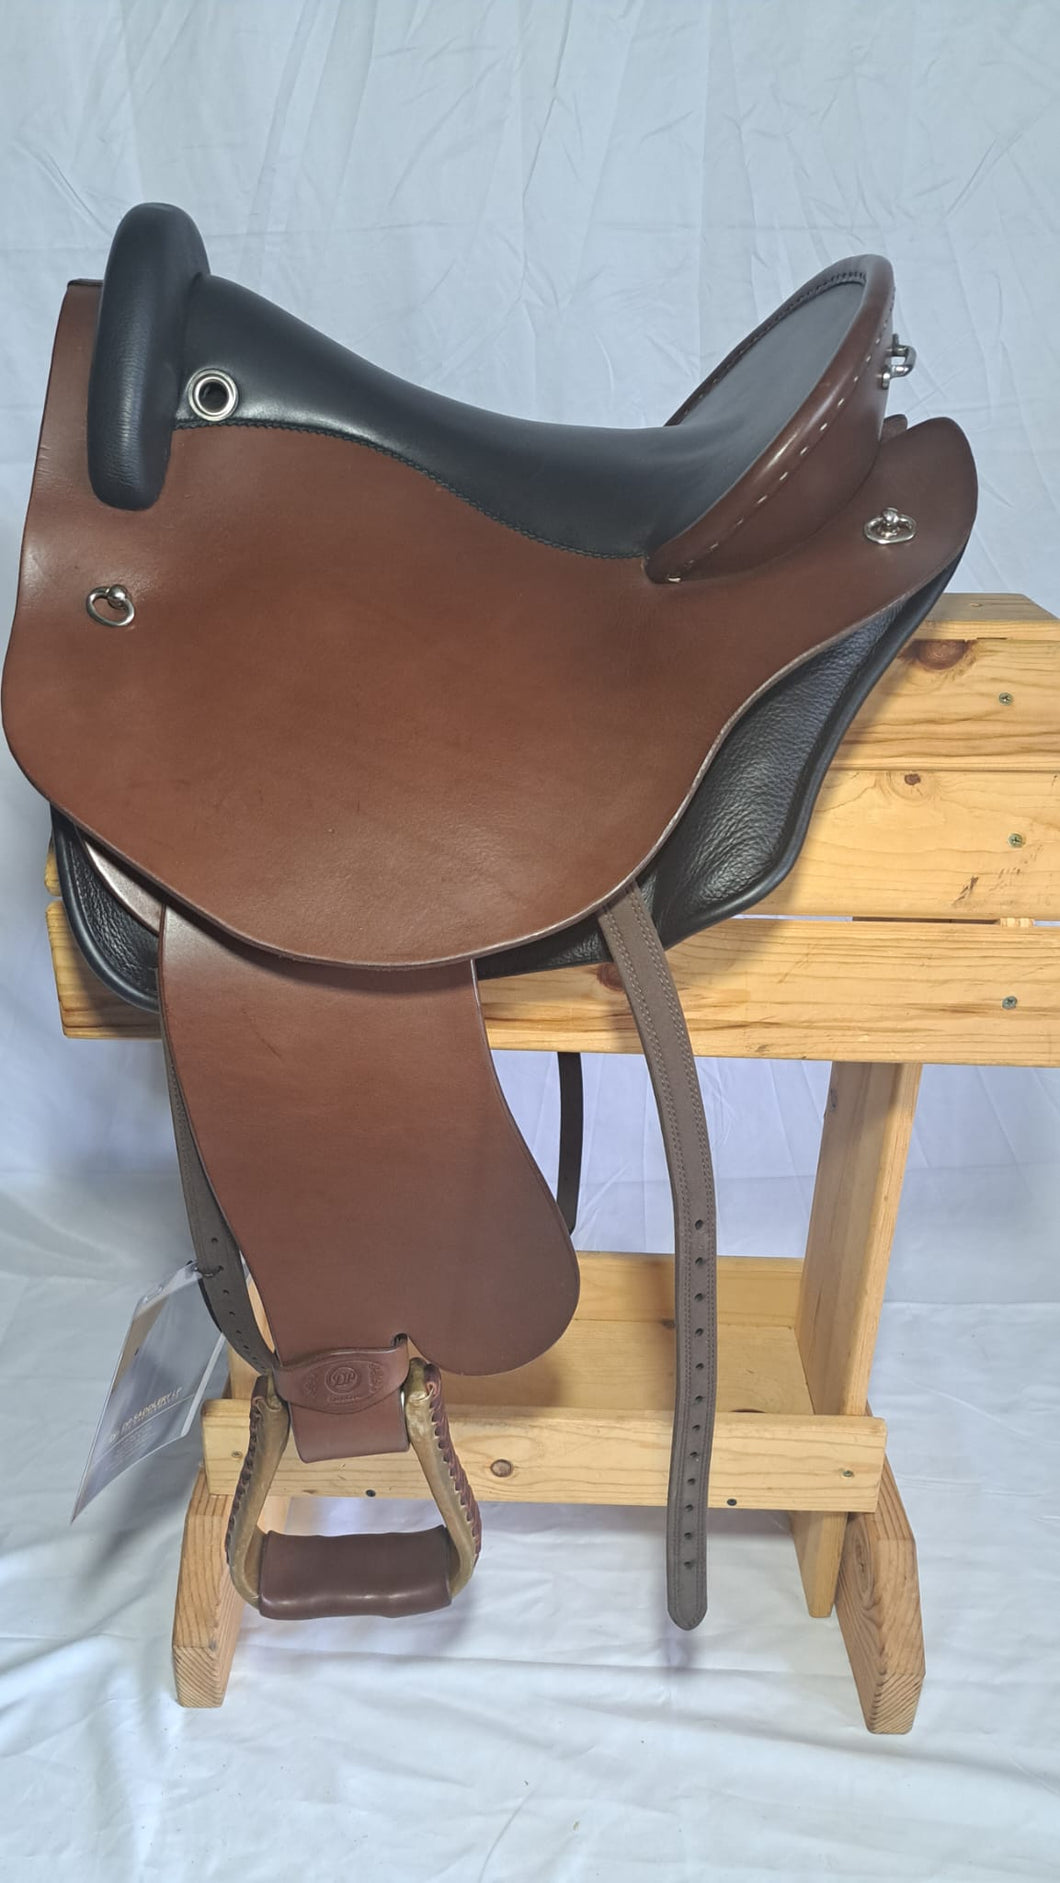 dp saddlery quantum with fenders SKU 7157- side view on a wooden saddle rack - white background